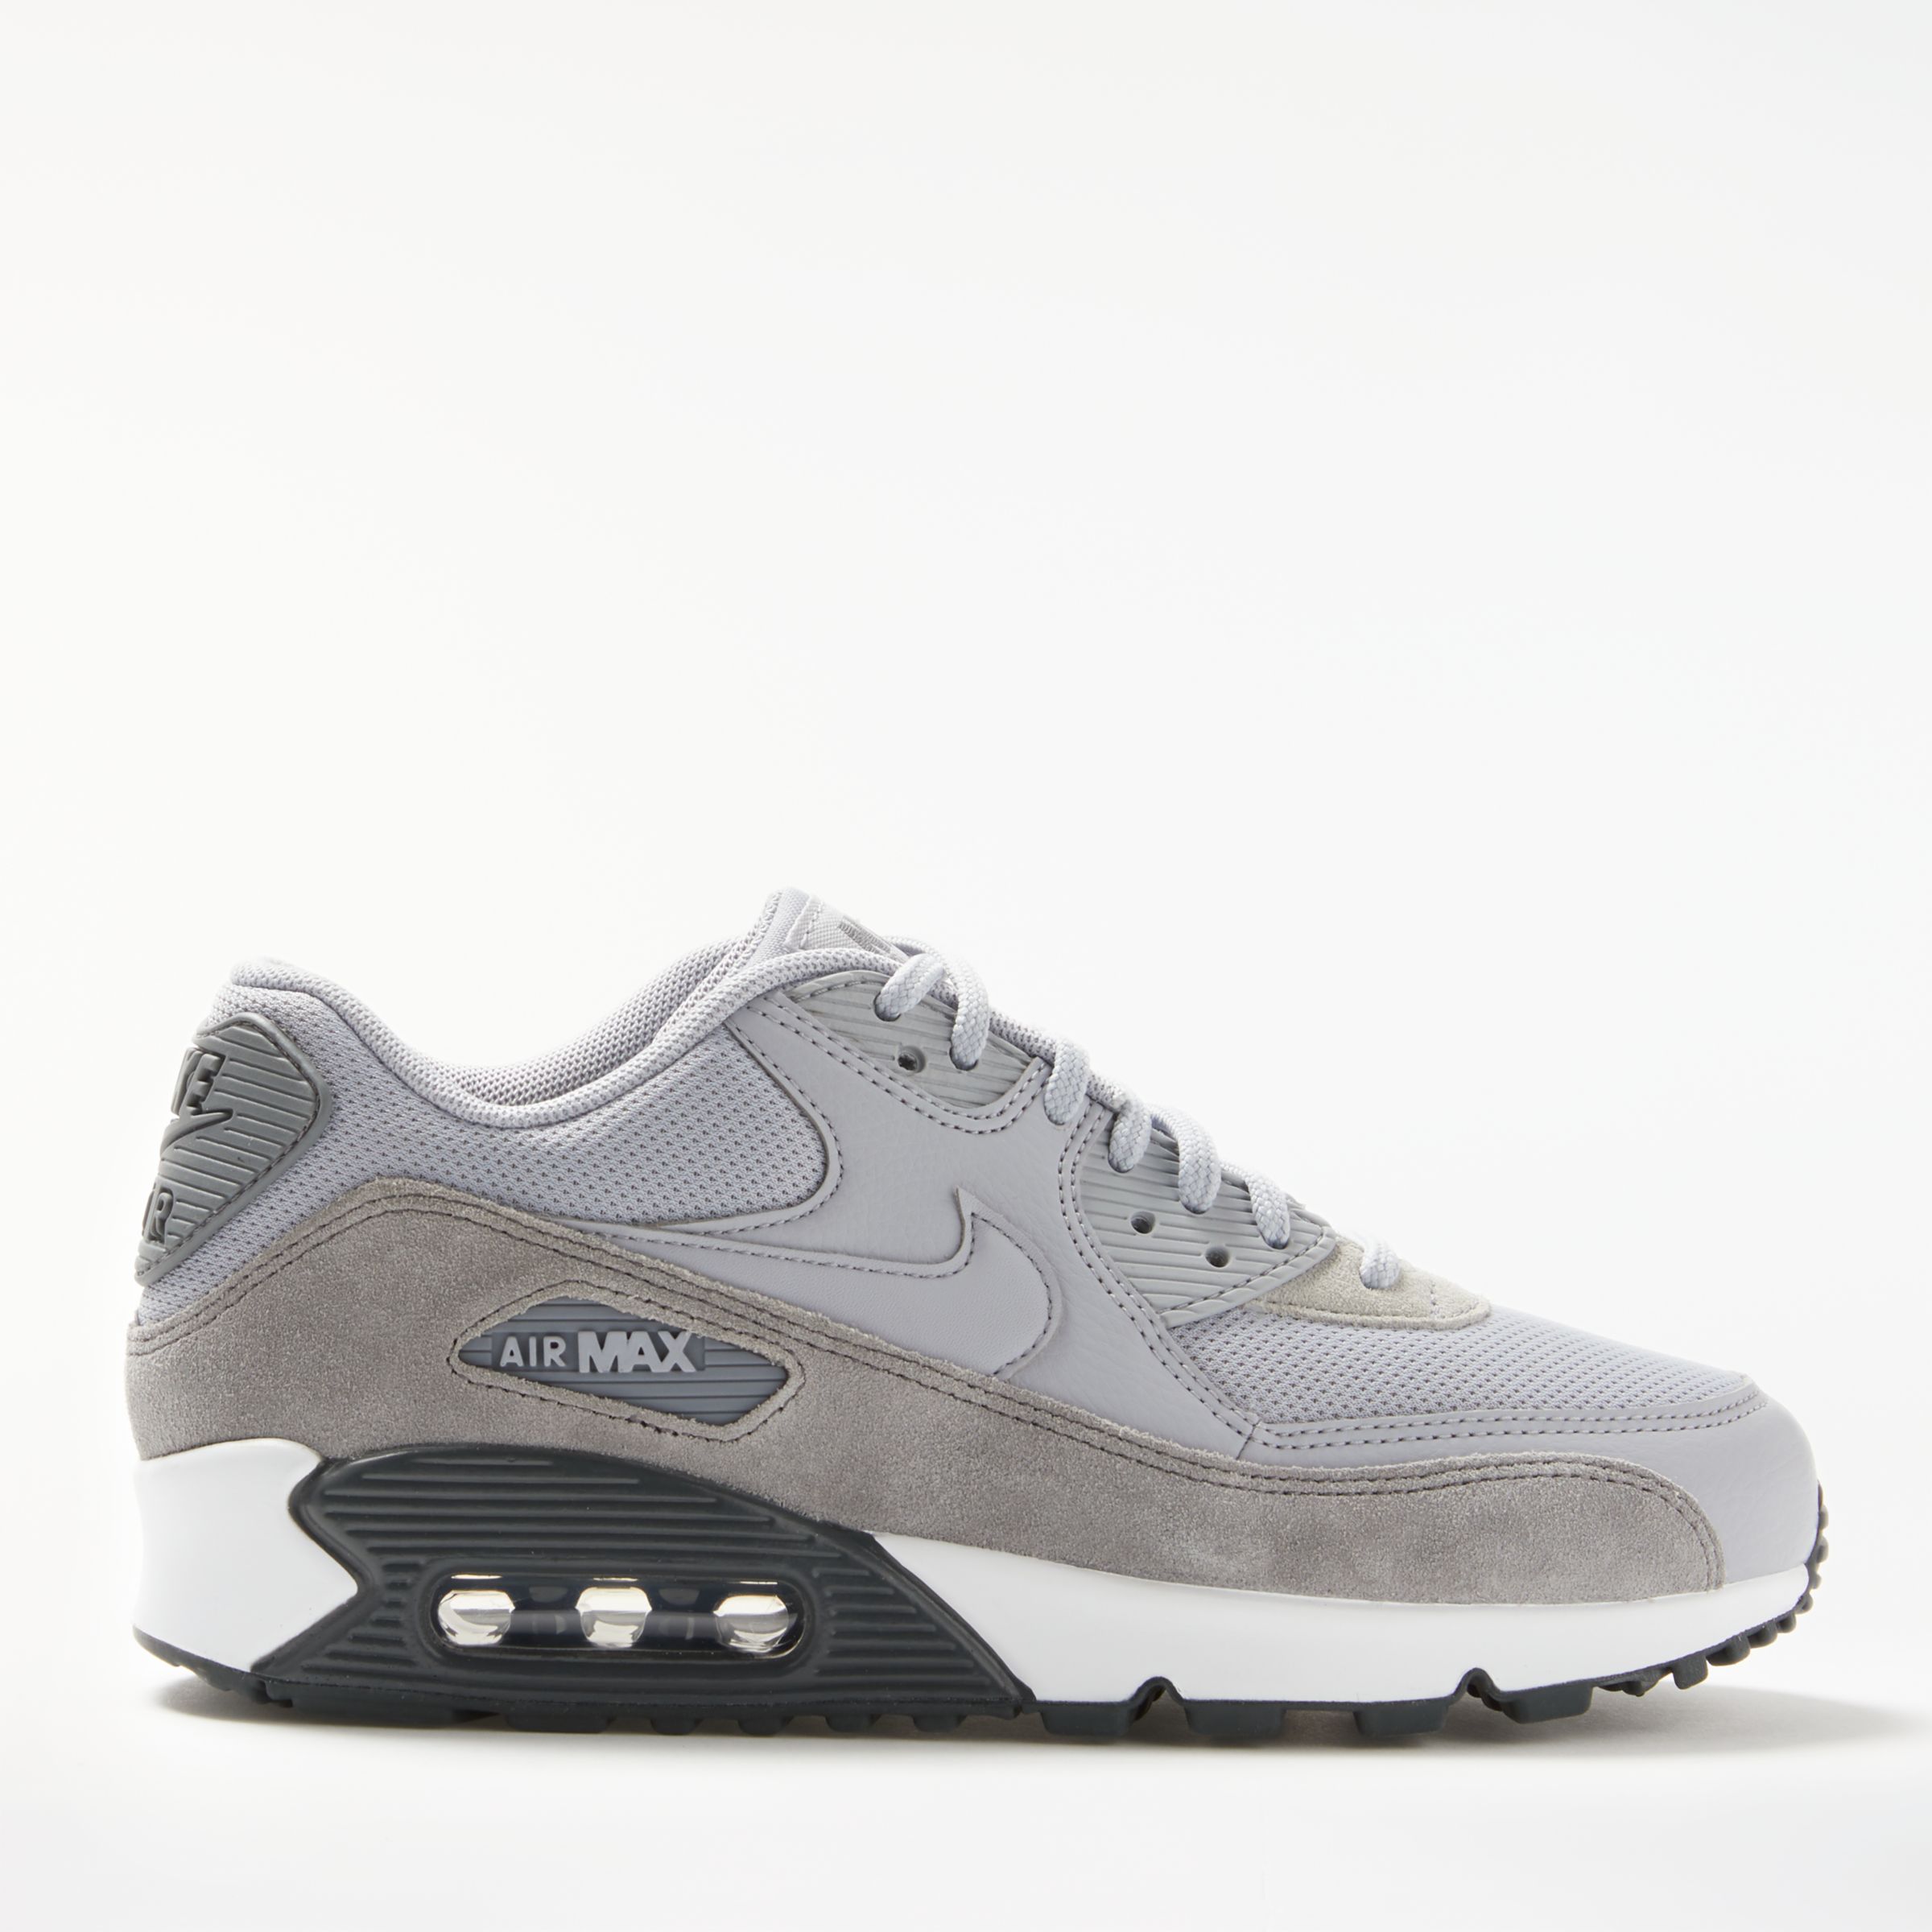 Nike Air Max 90 Women's Trainers at 